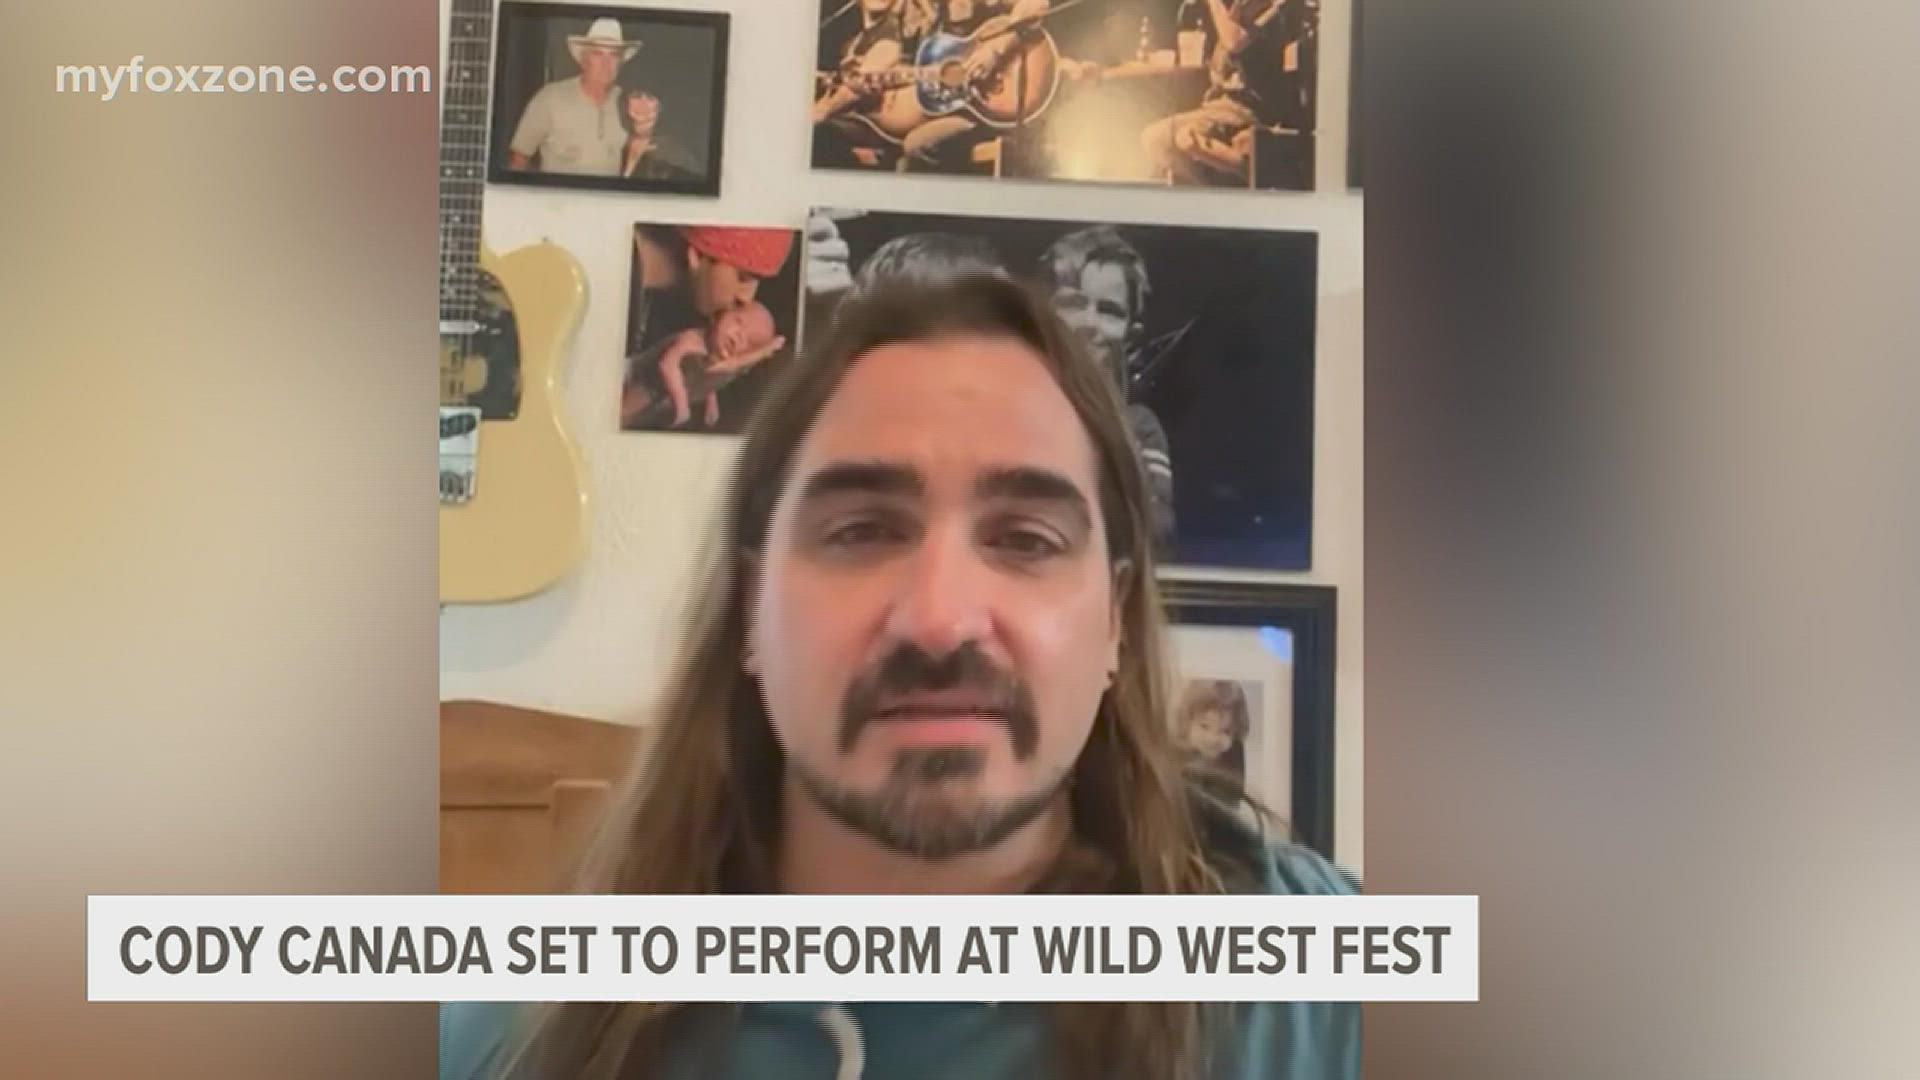 Canada and the Departed will perform at the Bill Aylor Sr. Memorial RiverStage Aug. 5, the final night of the Wild West Fest.